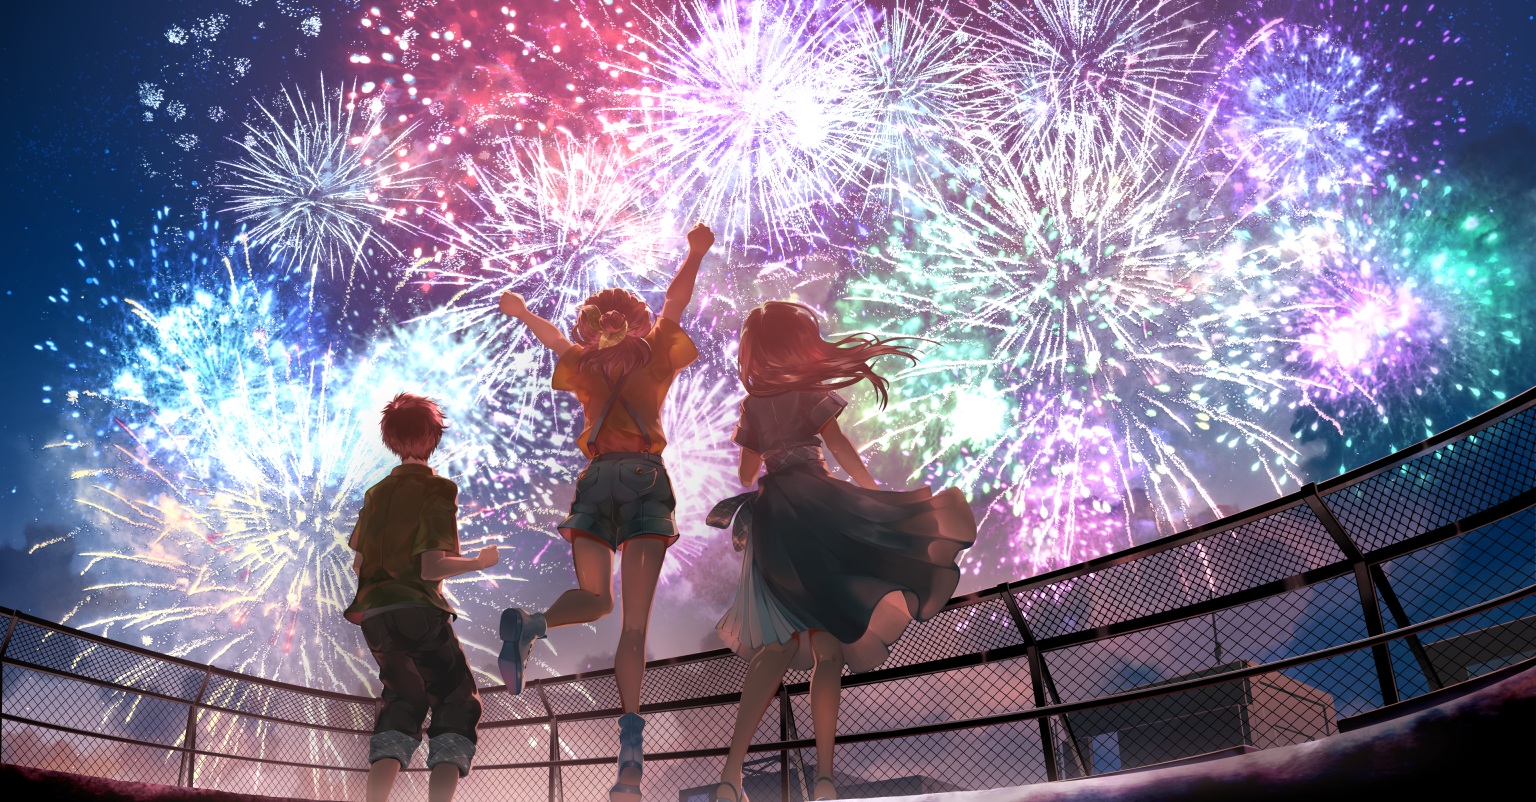 Anime Anime Girls Fireworks Sky Fence Jumping Arms Up Hair Blowing In The Wind Night Anime Boys 1536x802